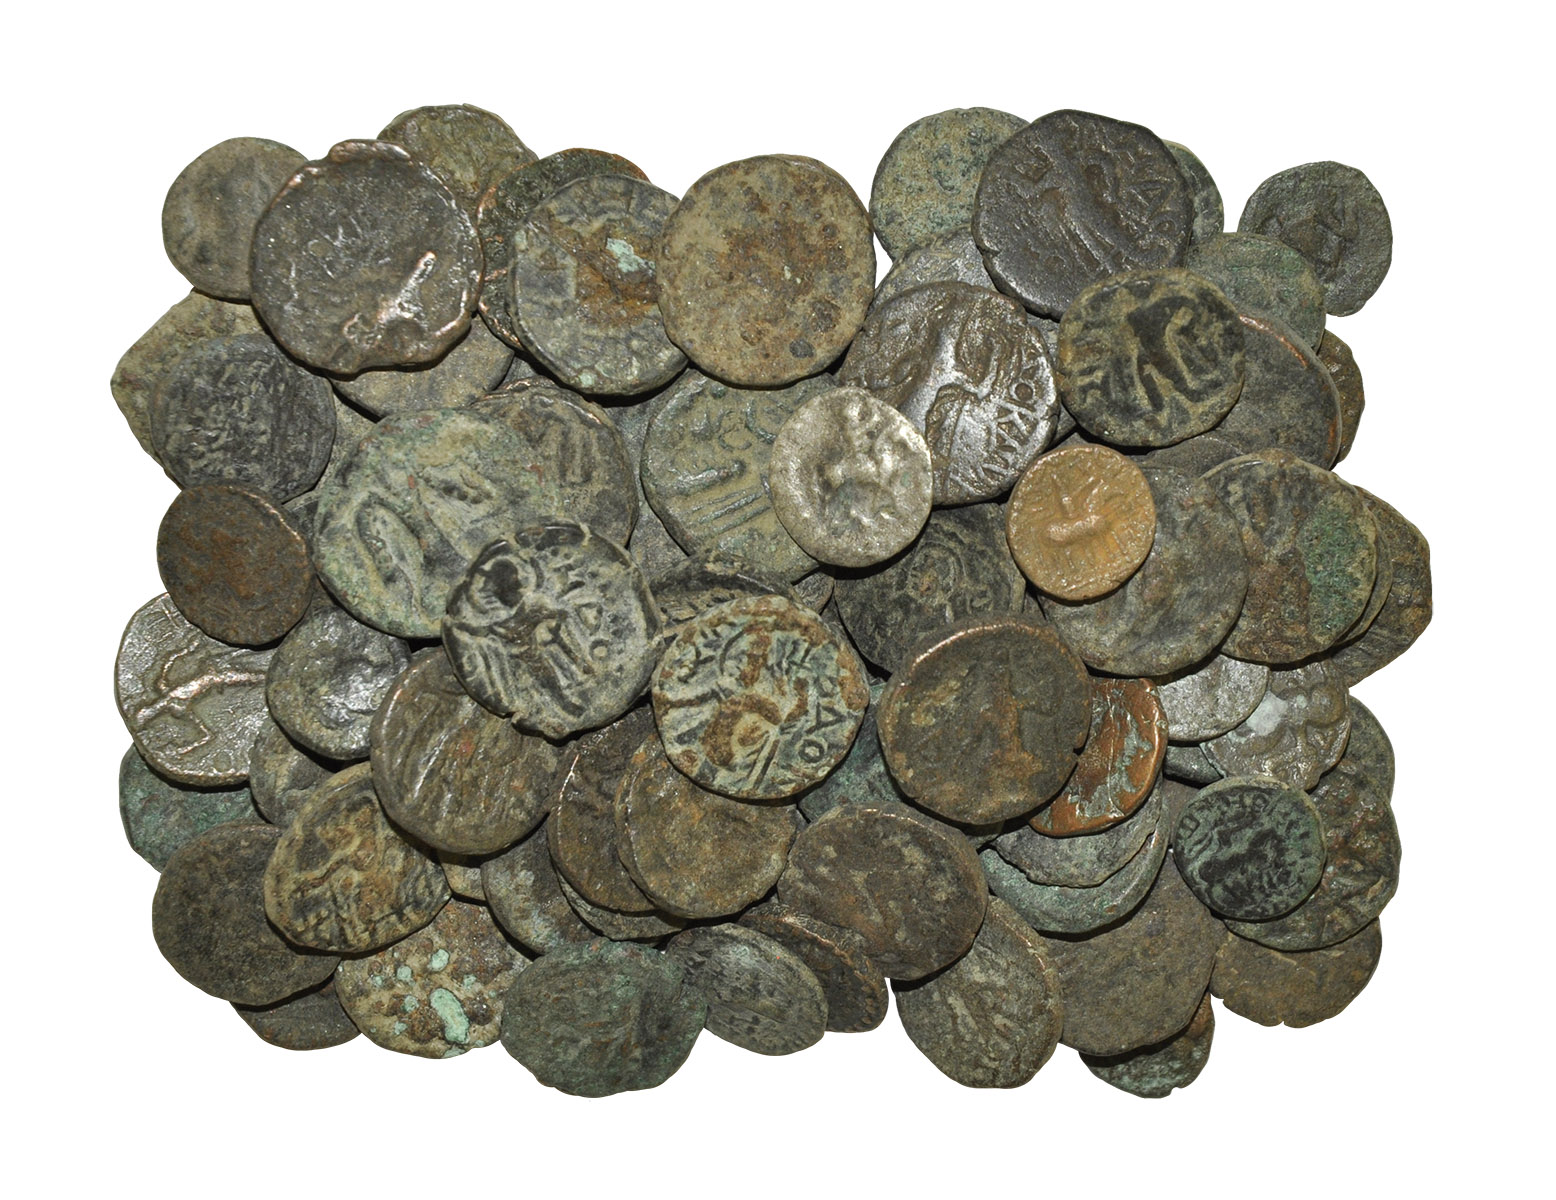 India - Kushan Mixed Coppers Group [100]